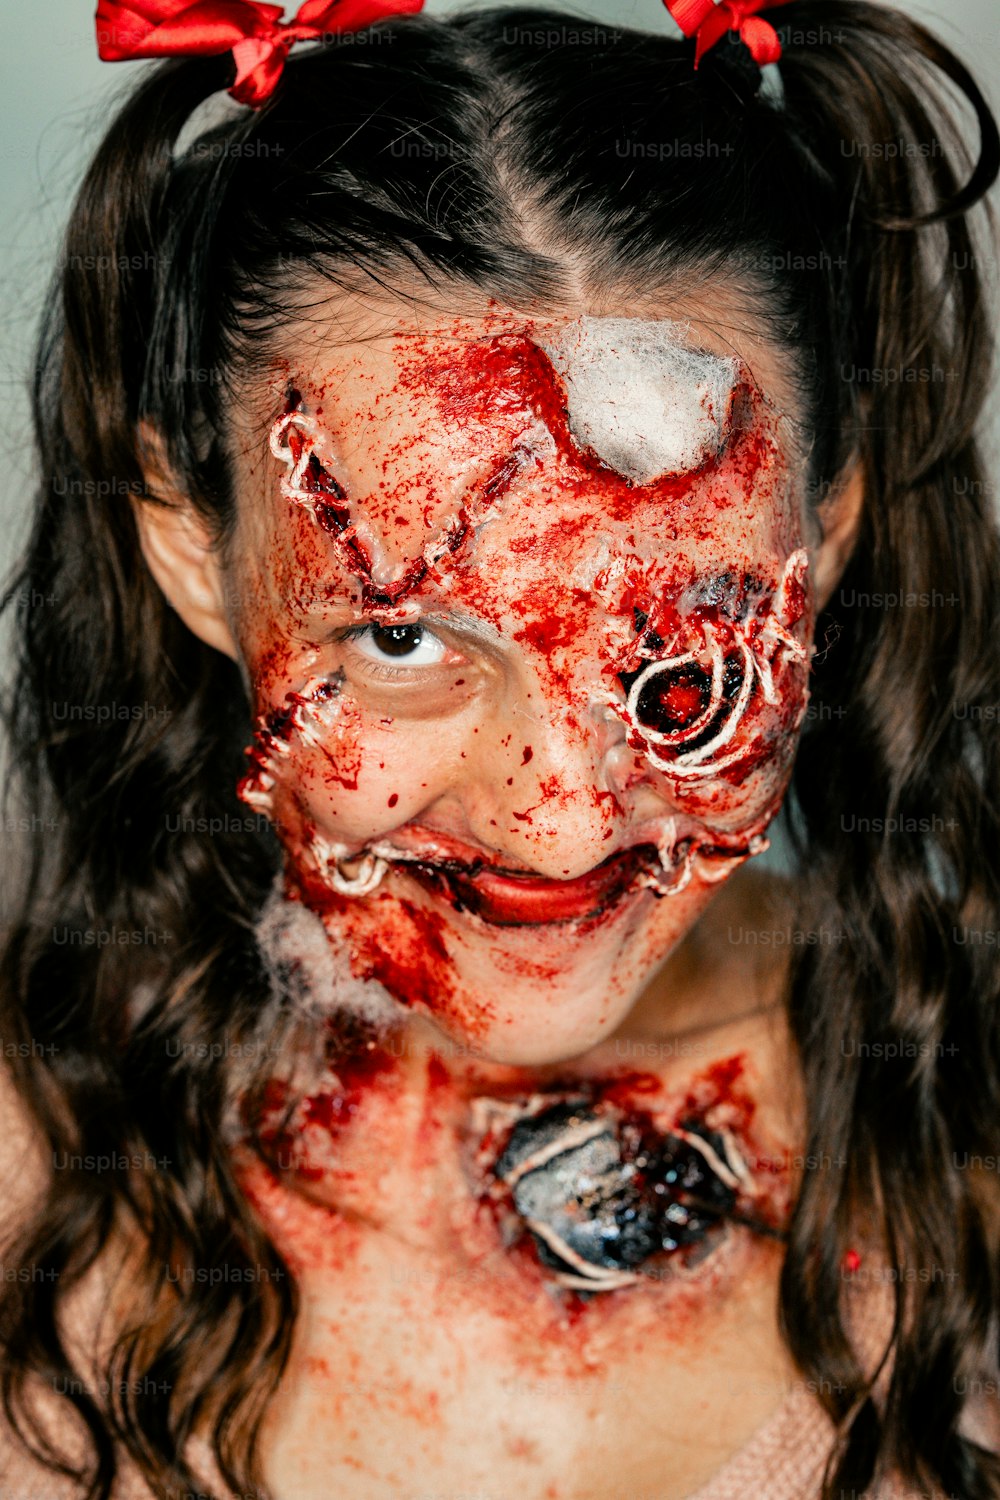 a young girl with blood all over her face